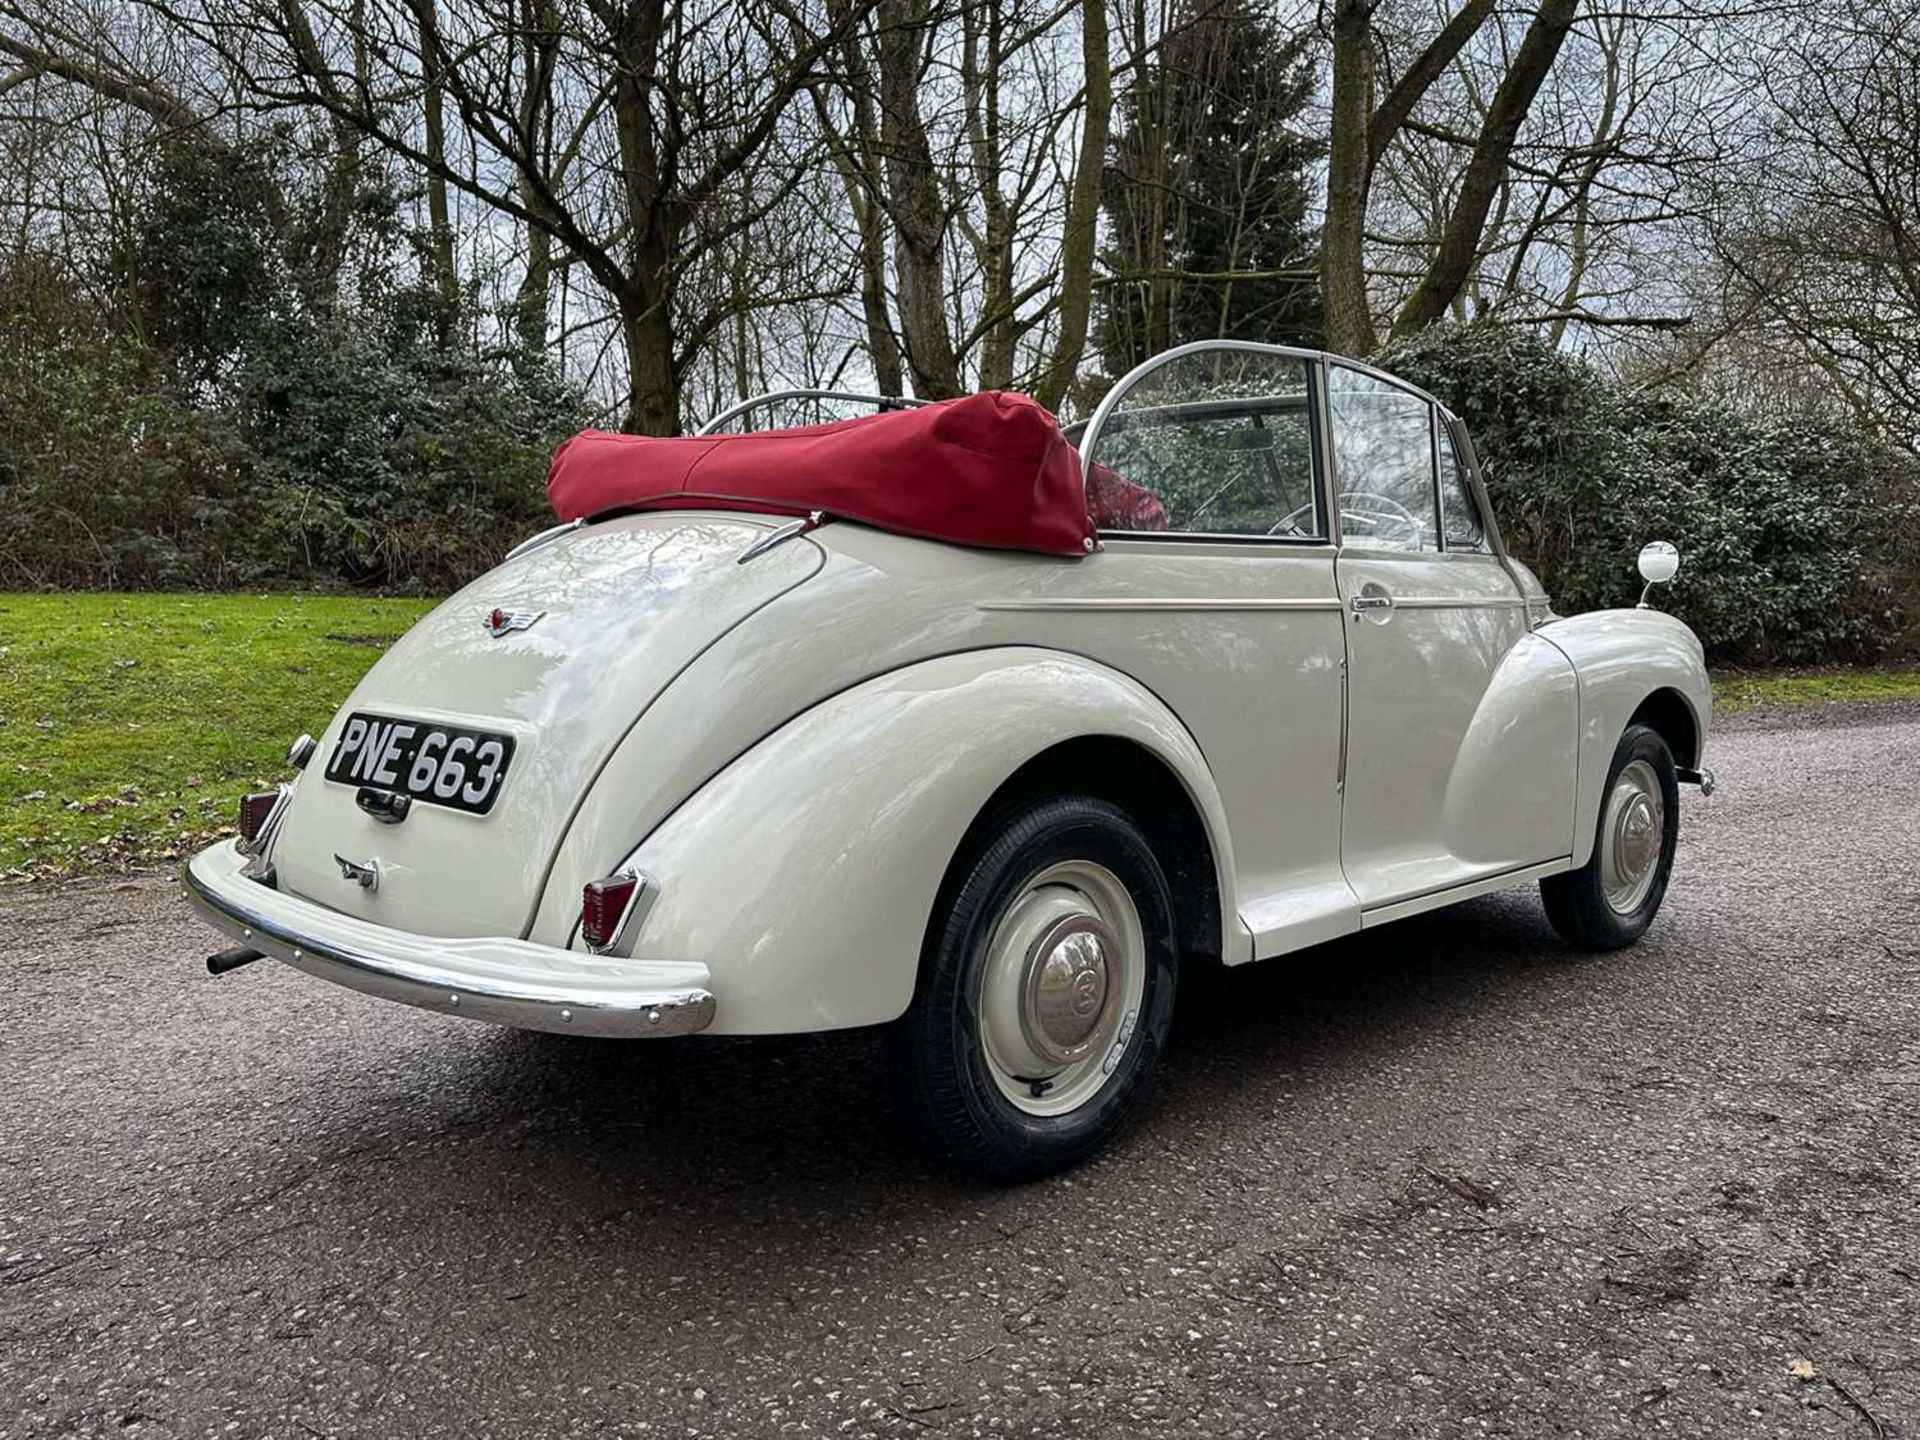 1954 Morris Minor Tourer Fully restored to concours standard - Image 26 of 100